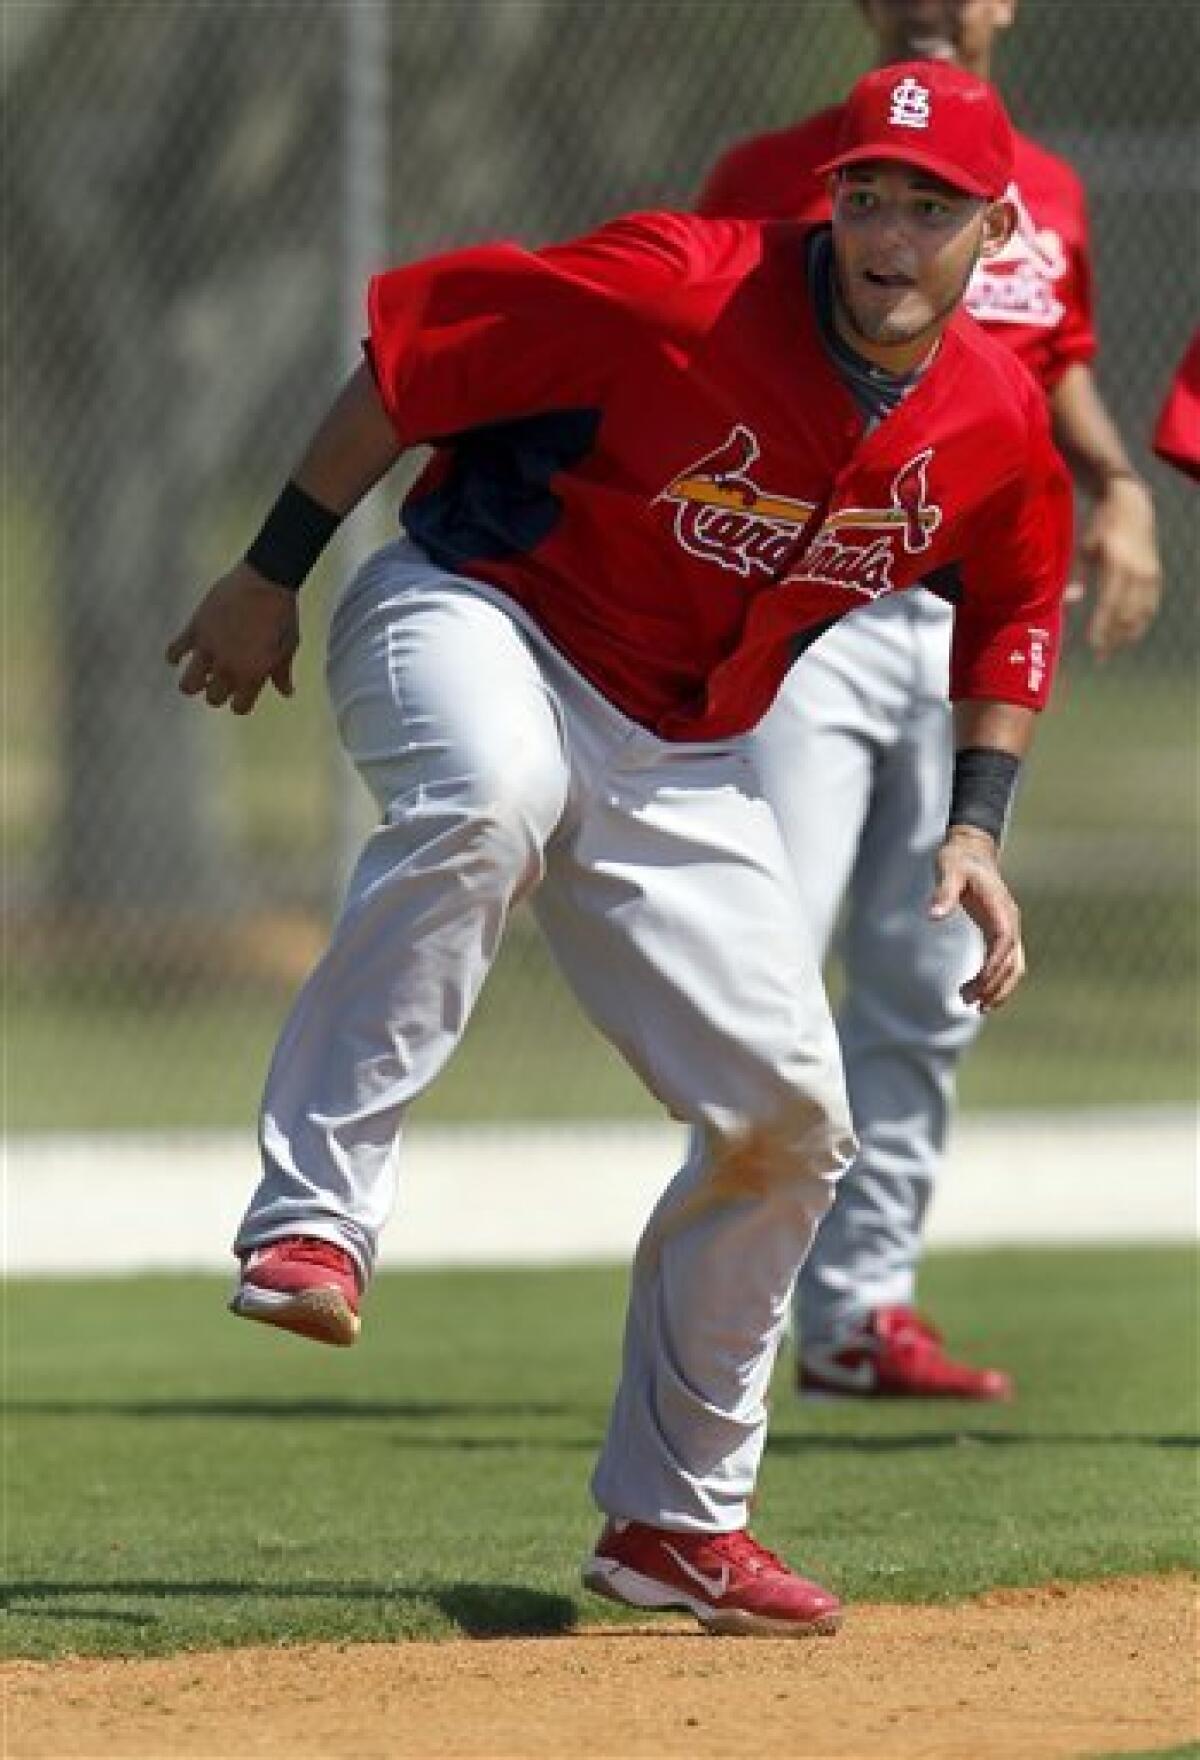 St. Louis Cardinals Catcher Yadier Molina to Consider Free Agency